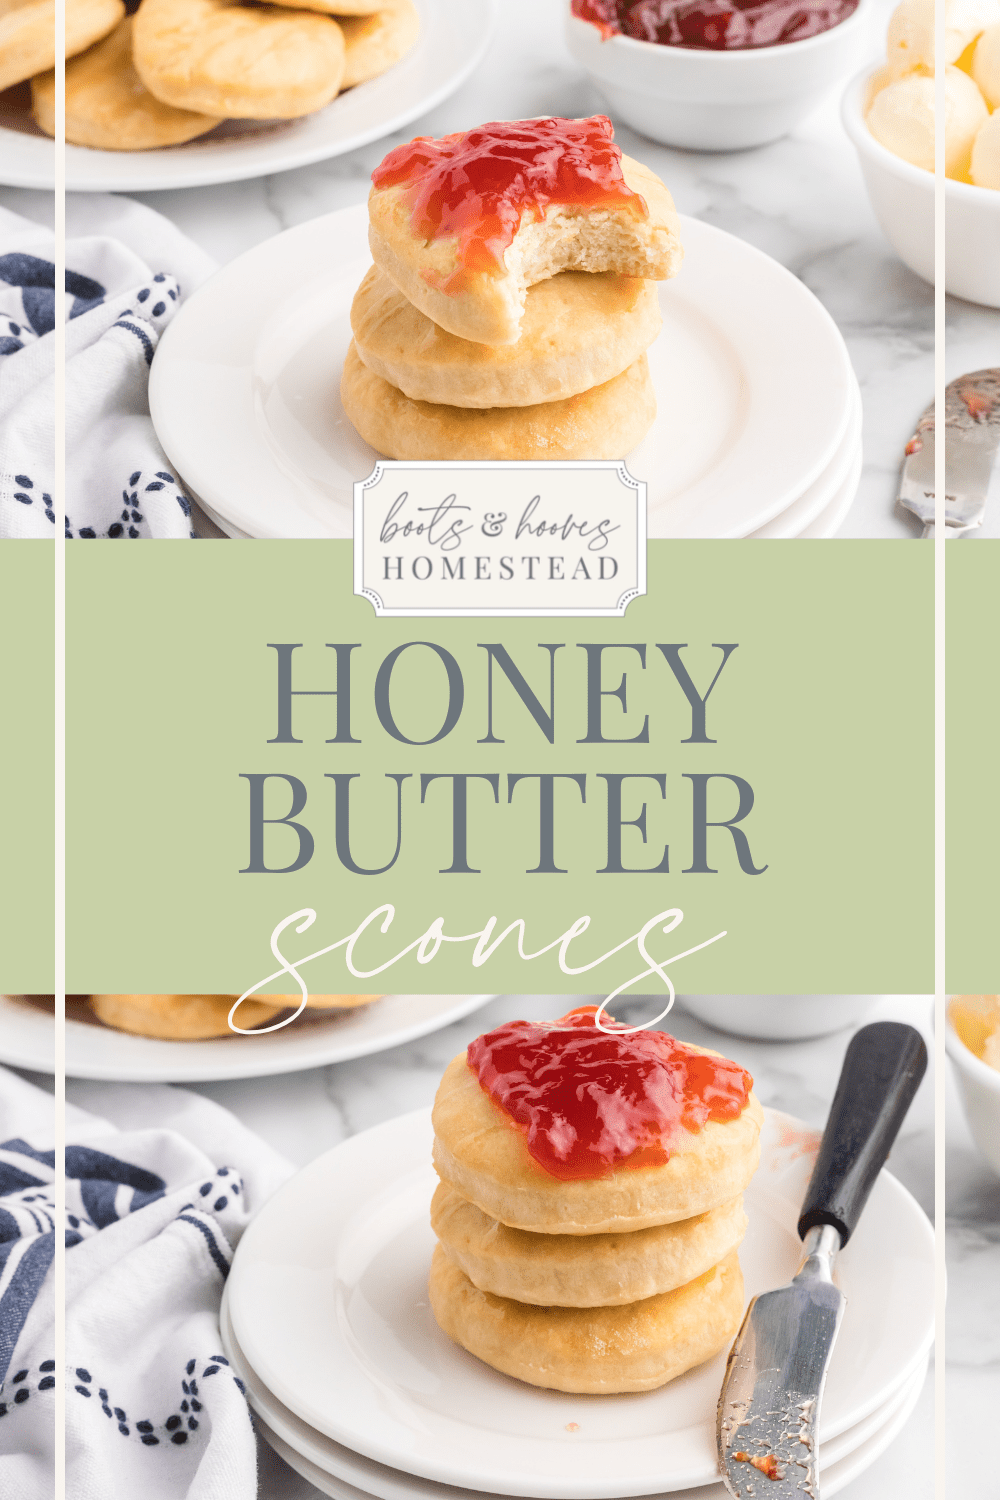 stacks of honey butter scones on white plates with strawberry jam on top.